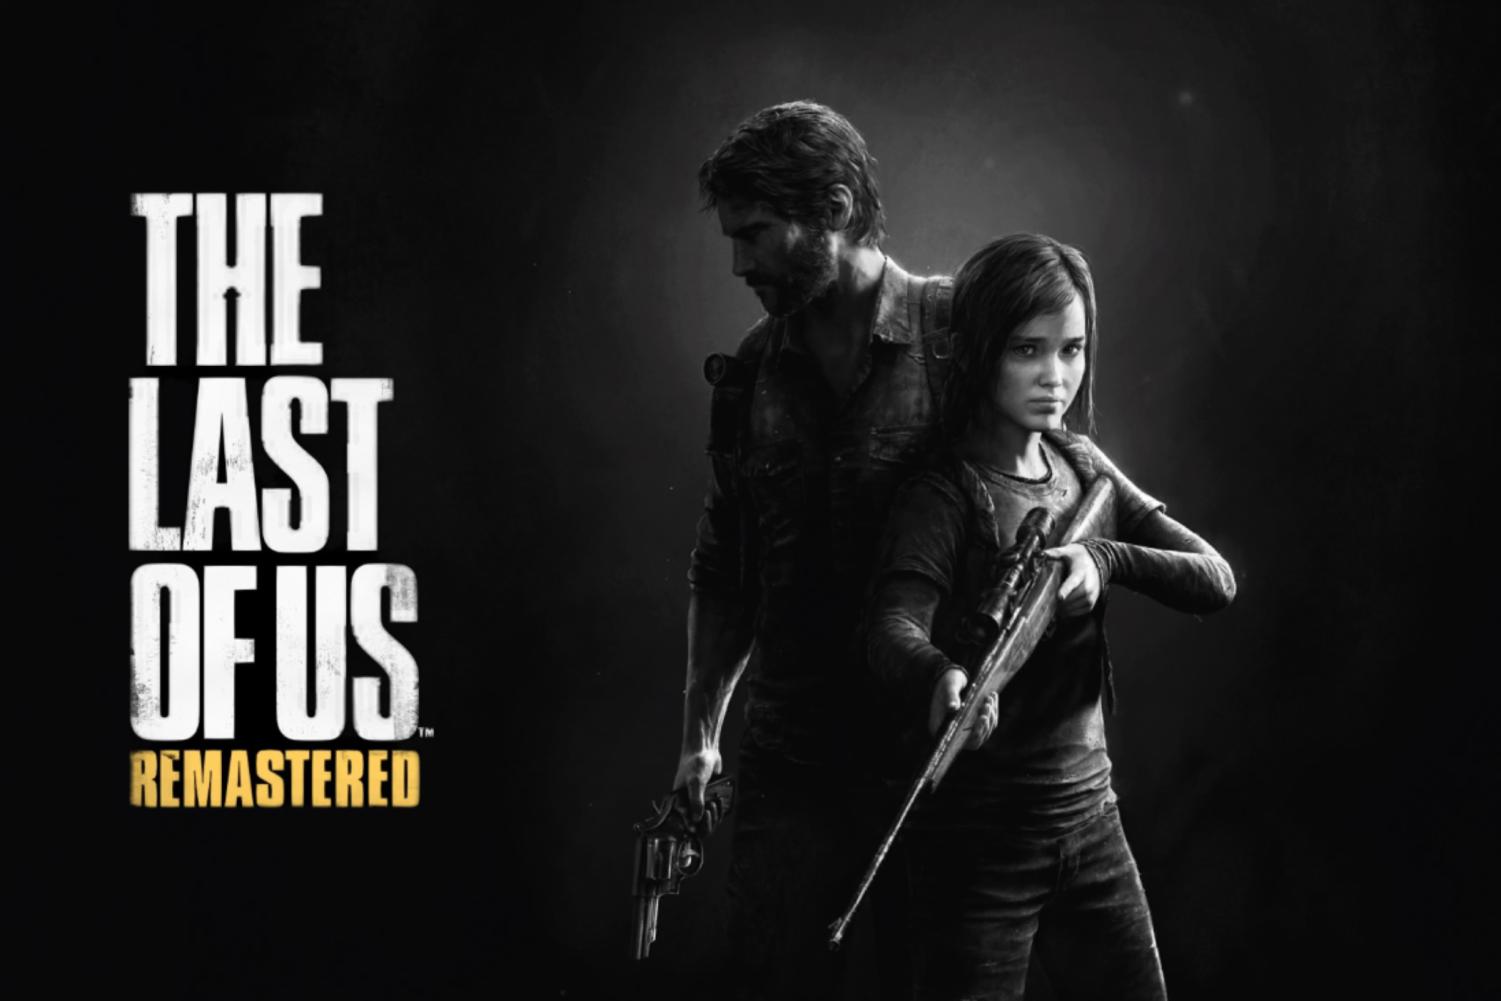 From Jakarta to tendrils, How 'The Last of Us' ep 2 is different